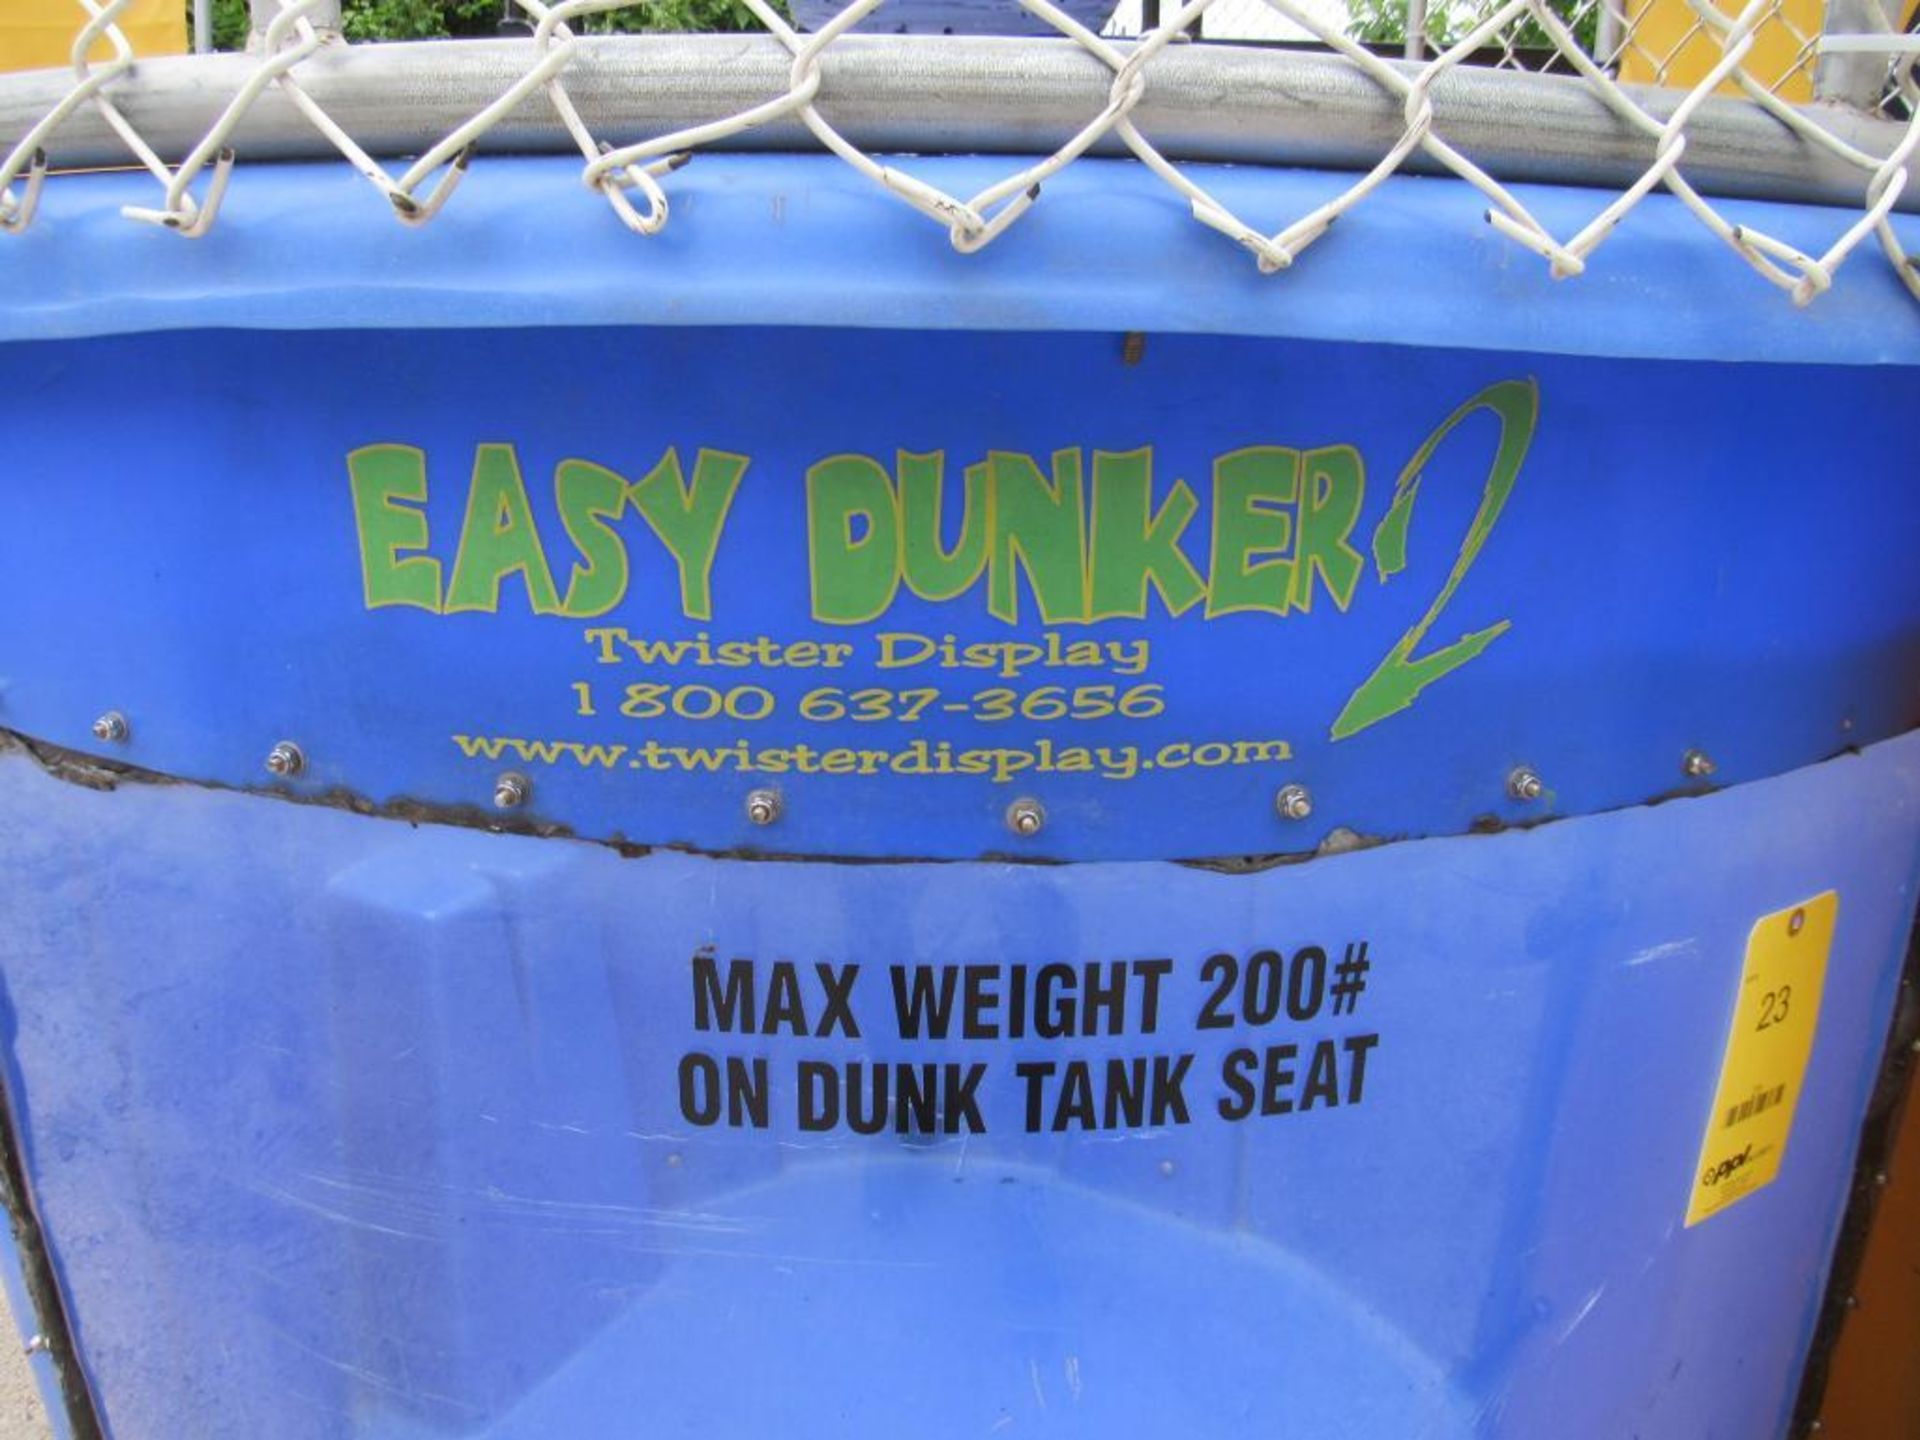 Dunk Tank Trailer mounted - includes bucket of balls, target and activation arm. See Lot 24A Misc. D - Image 3 of 4